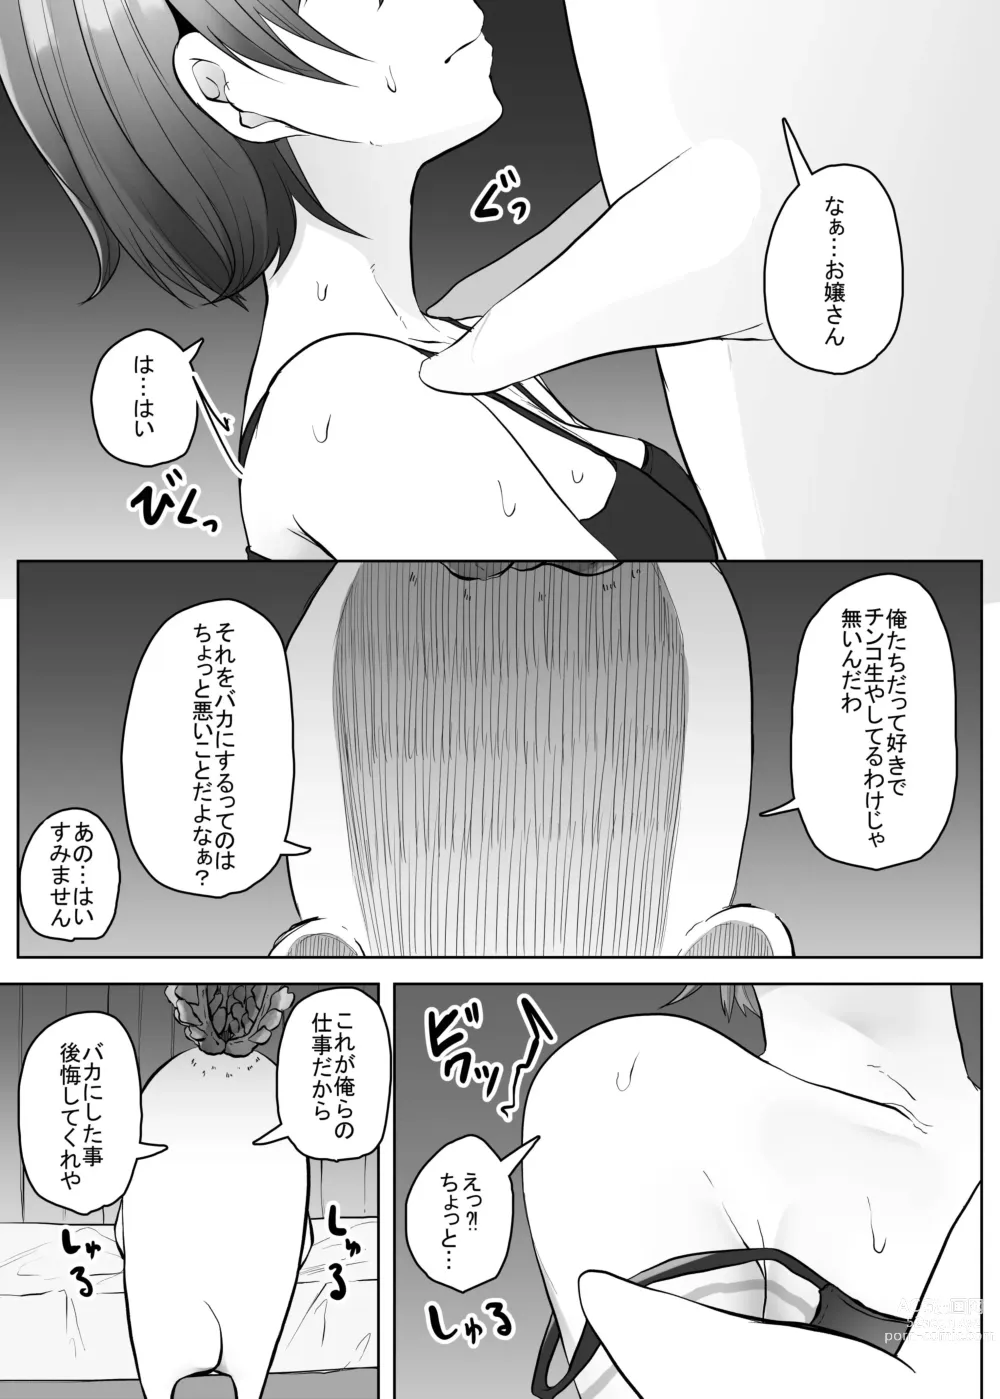 Page 13 of doujinshi Sexy~Vegetables